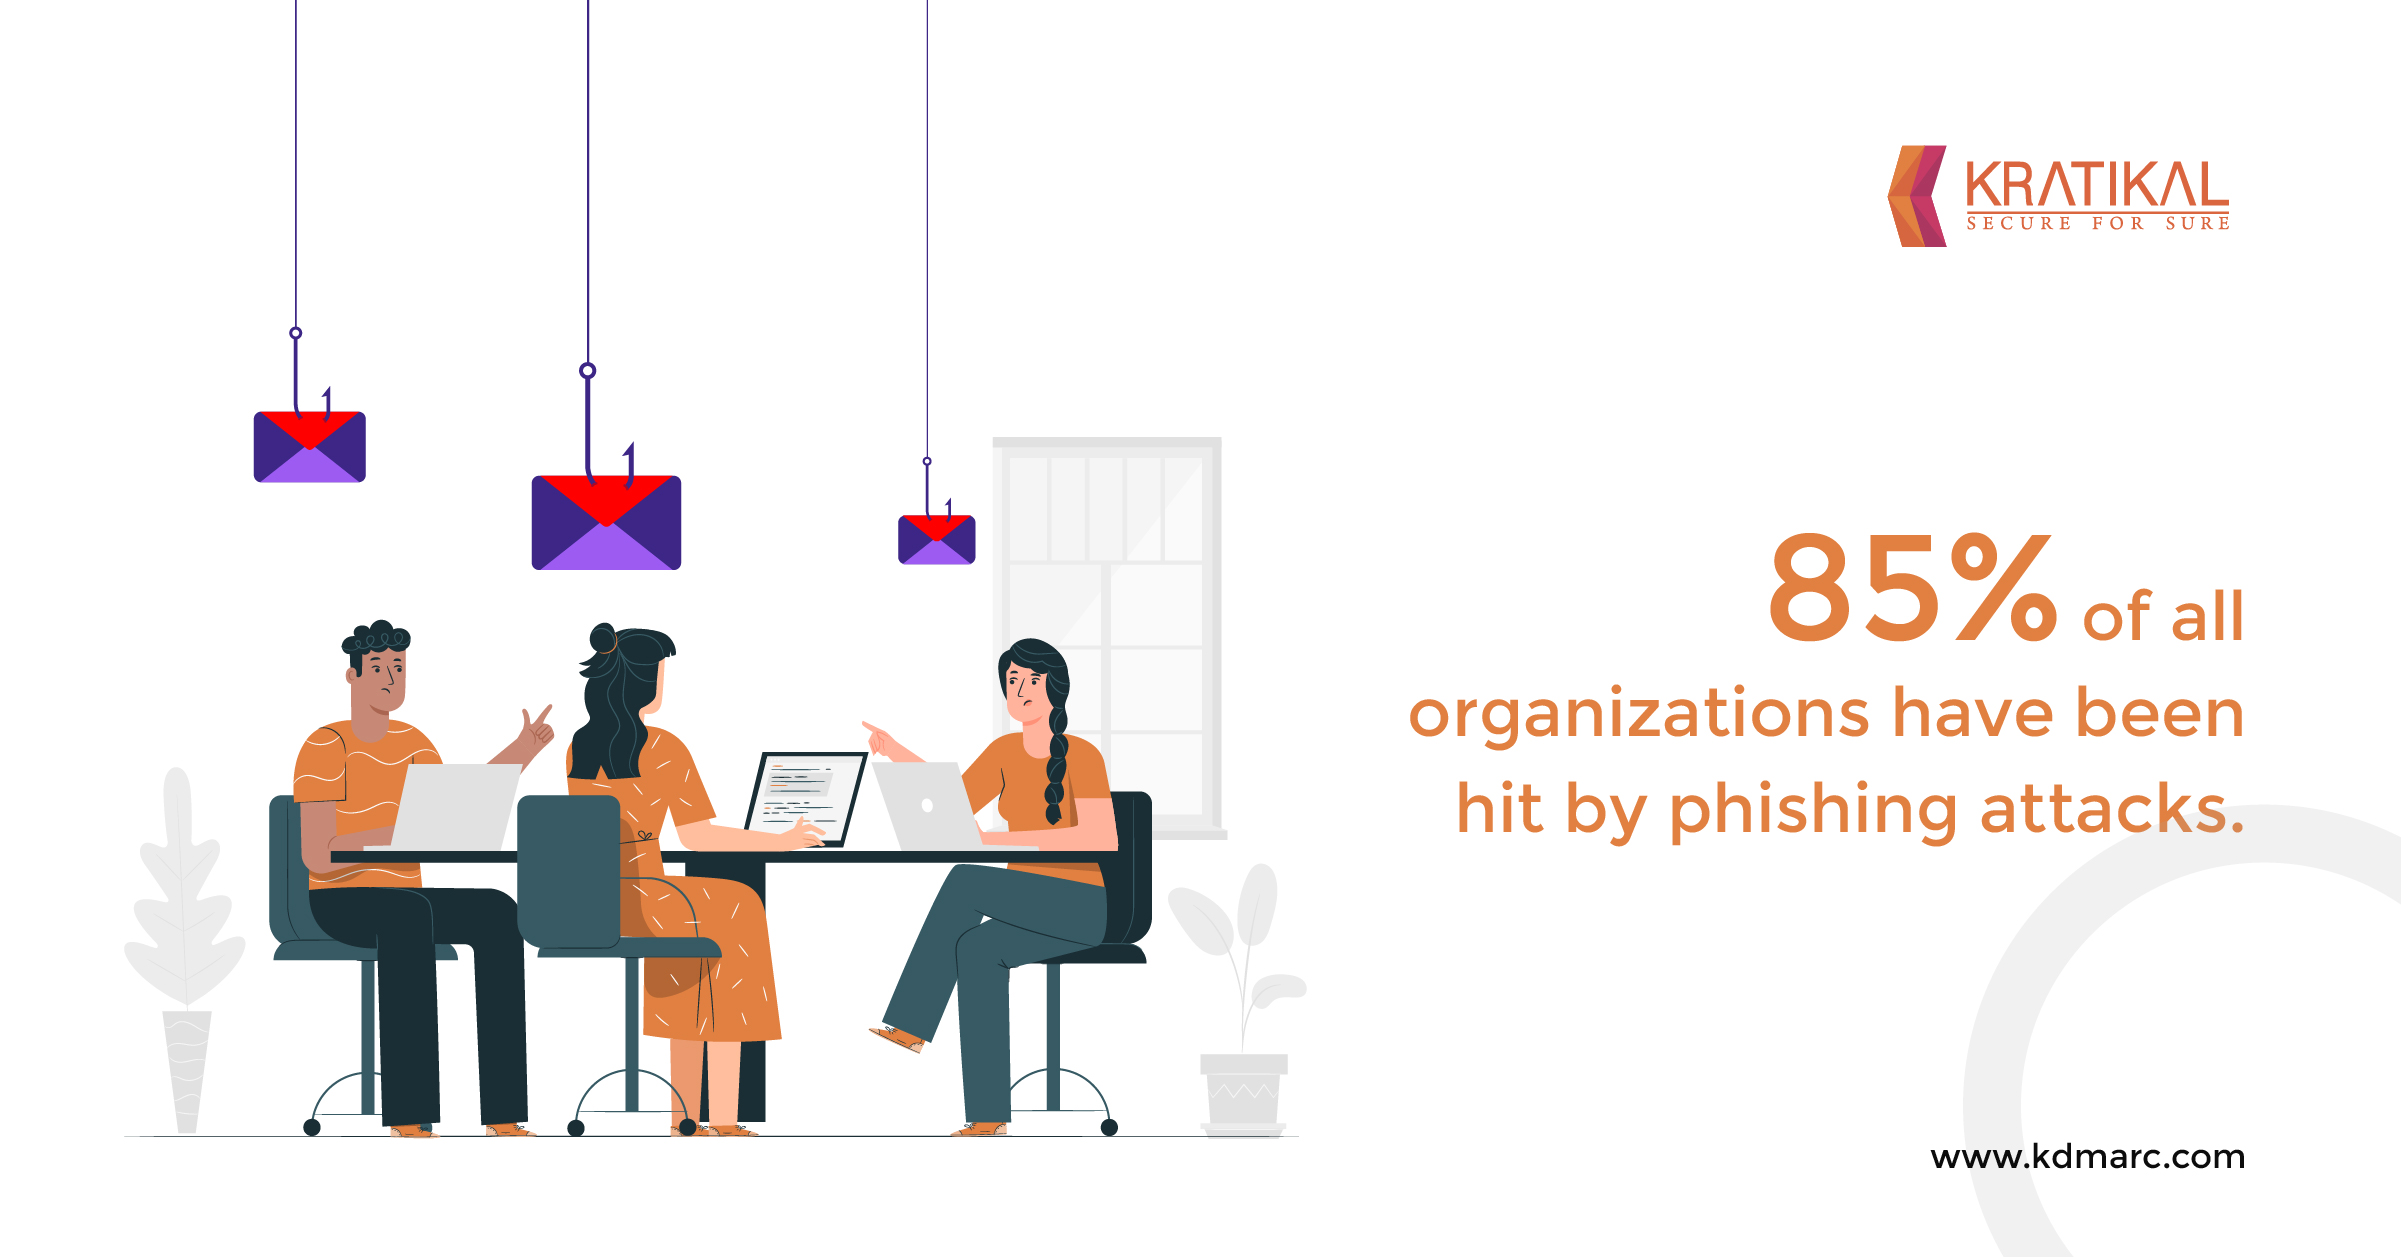 85% of all organizations have been hit by phishing attacks